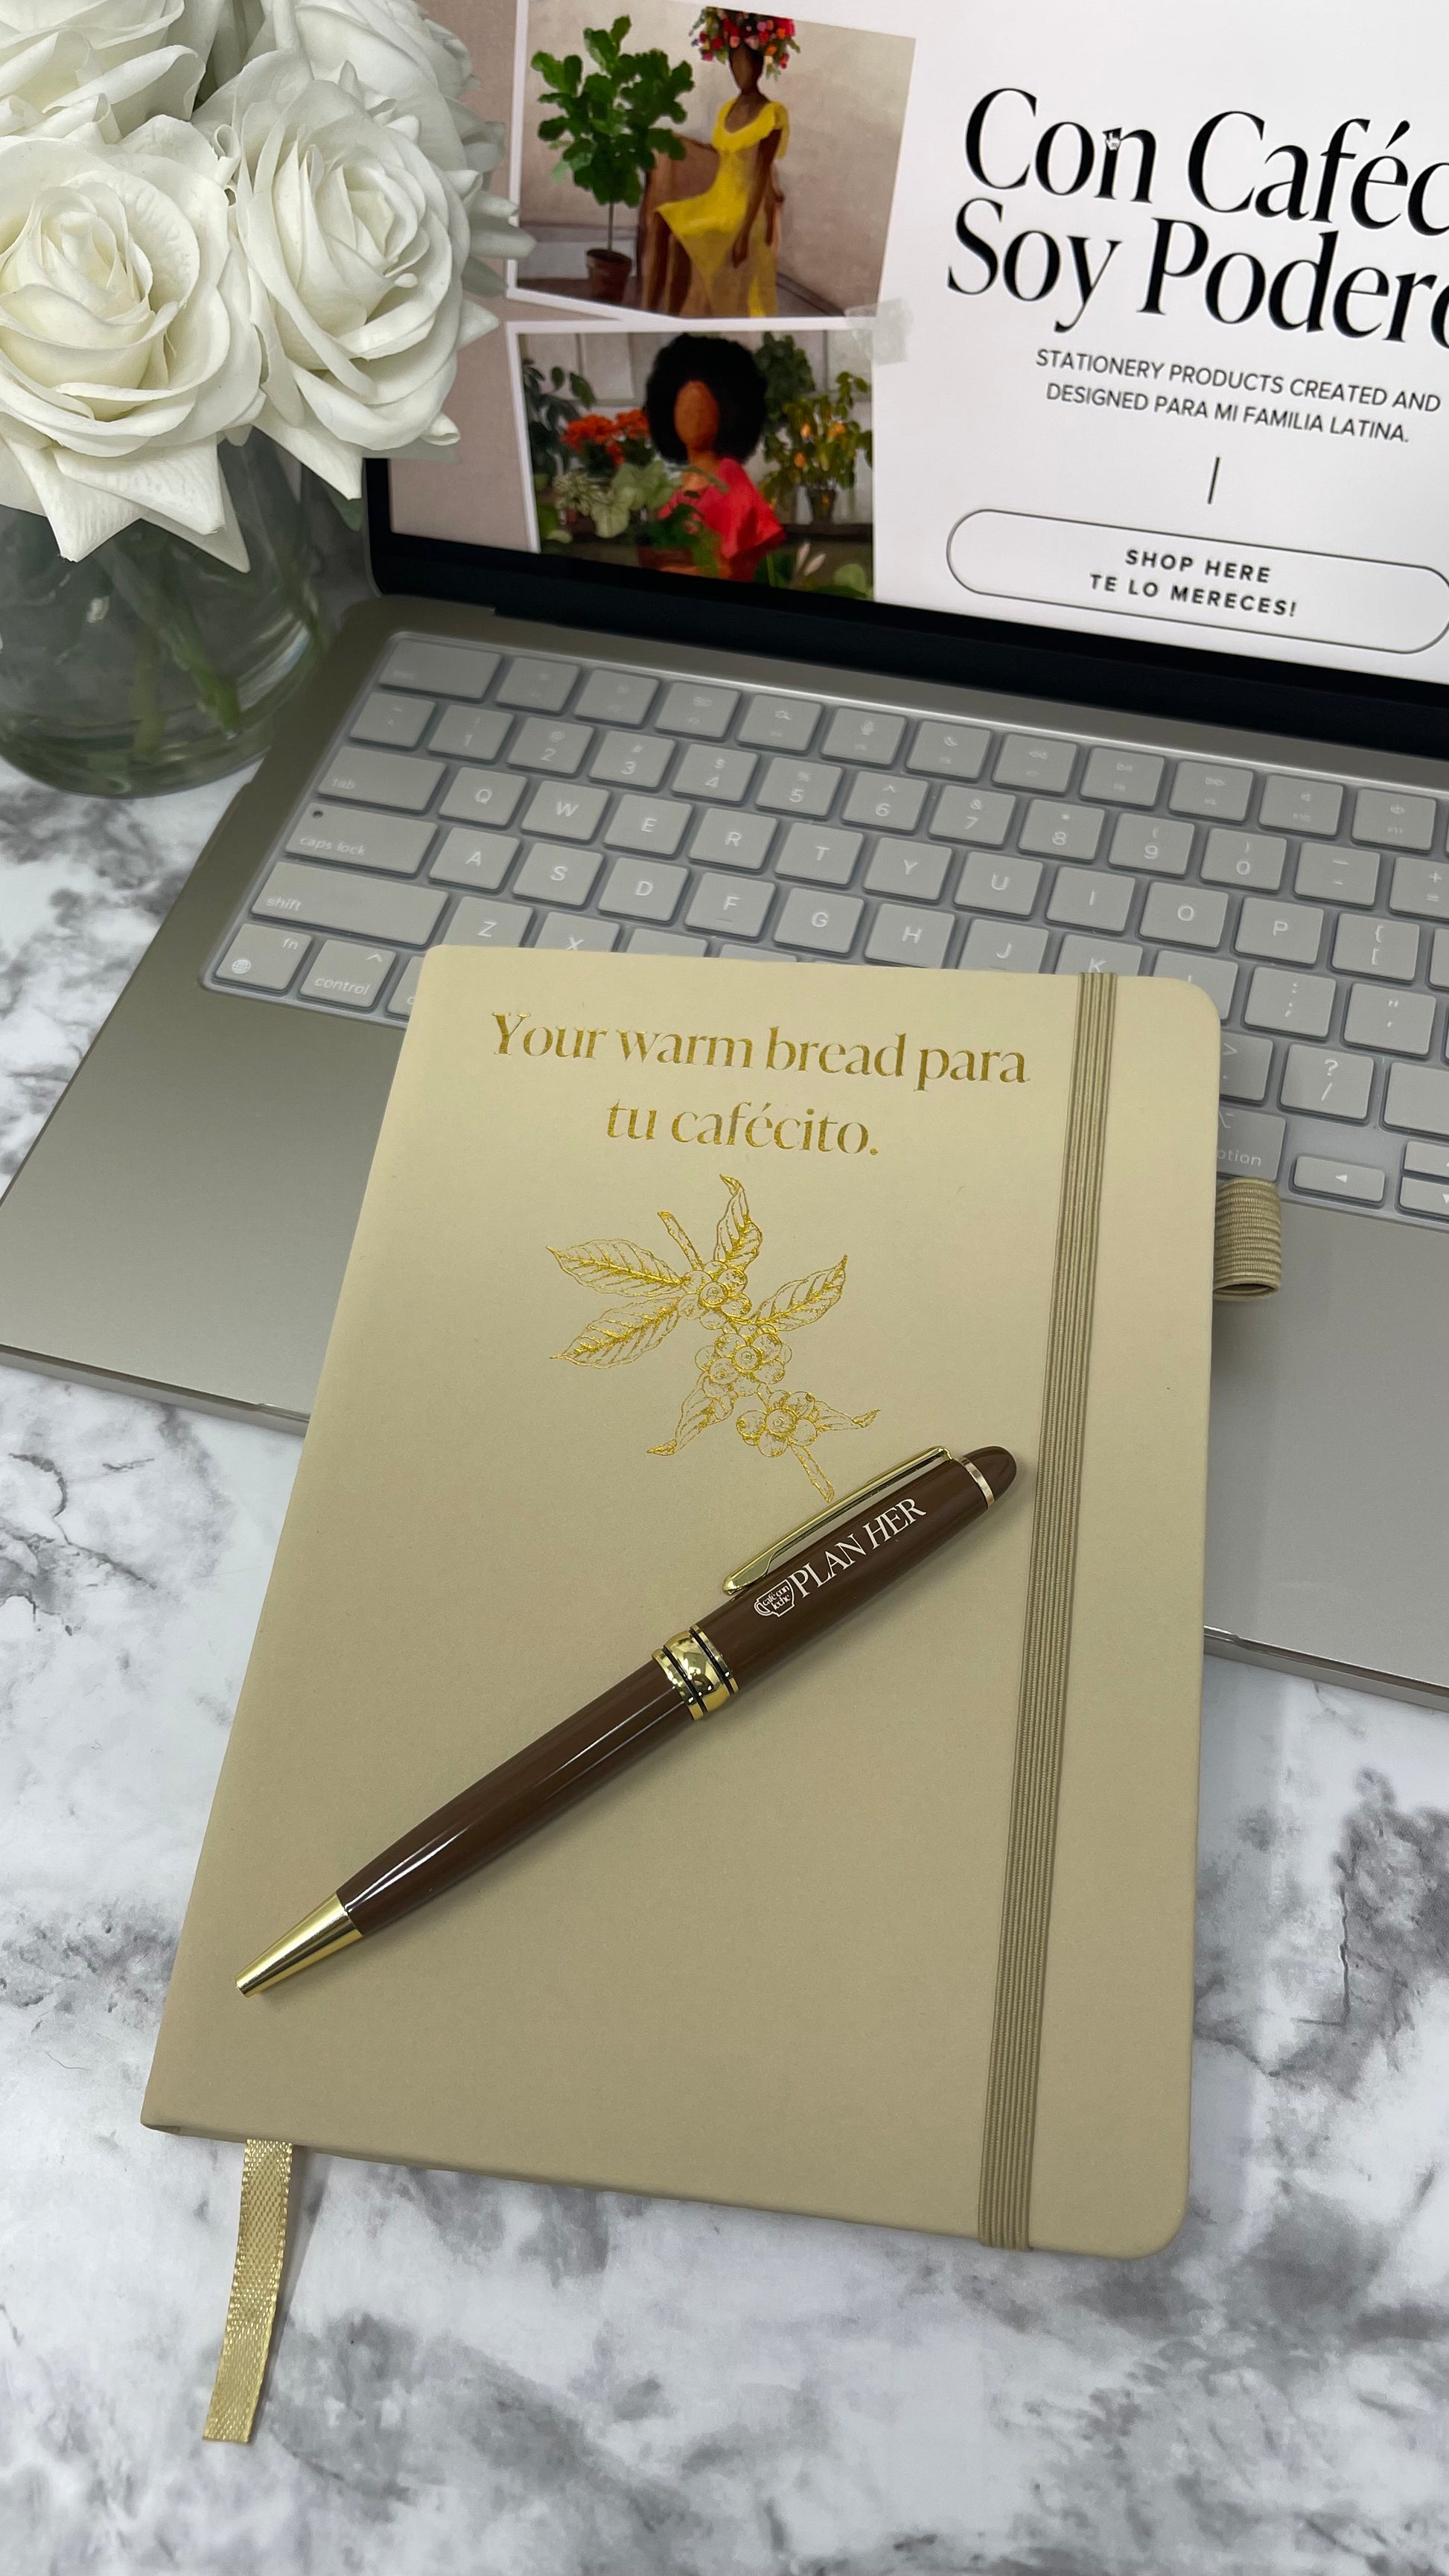 This journal is perfect for reflecting on your spiritual journey, your relationship with God, and your spiritual growth. The perfect way to deepen your spiritual practice, meditate and connect with your faith.